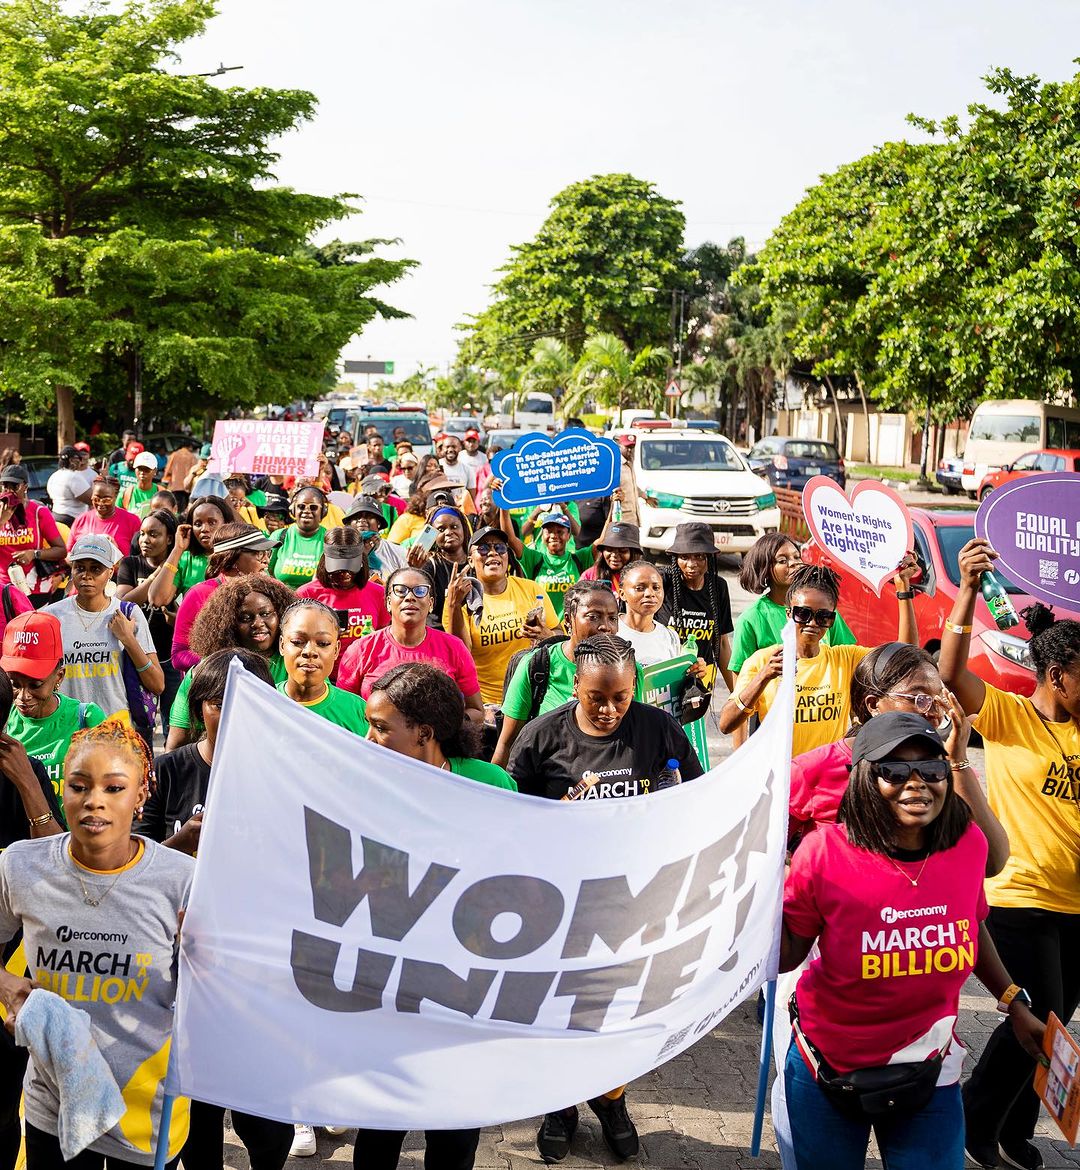 Herconomy’s “March to a Billion